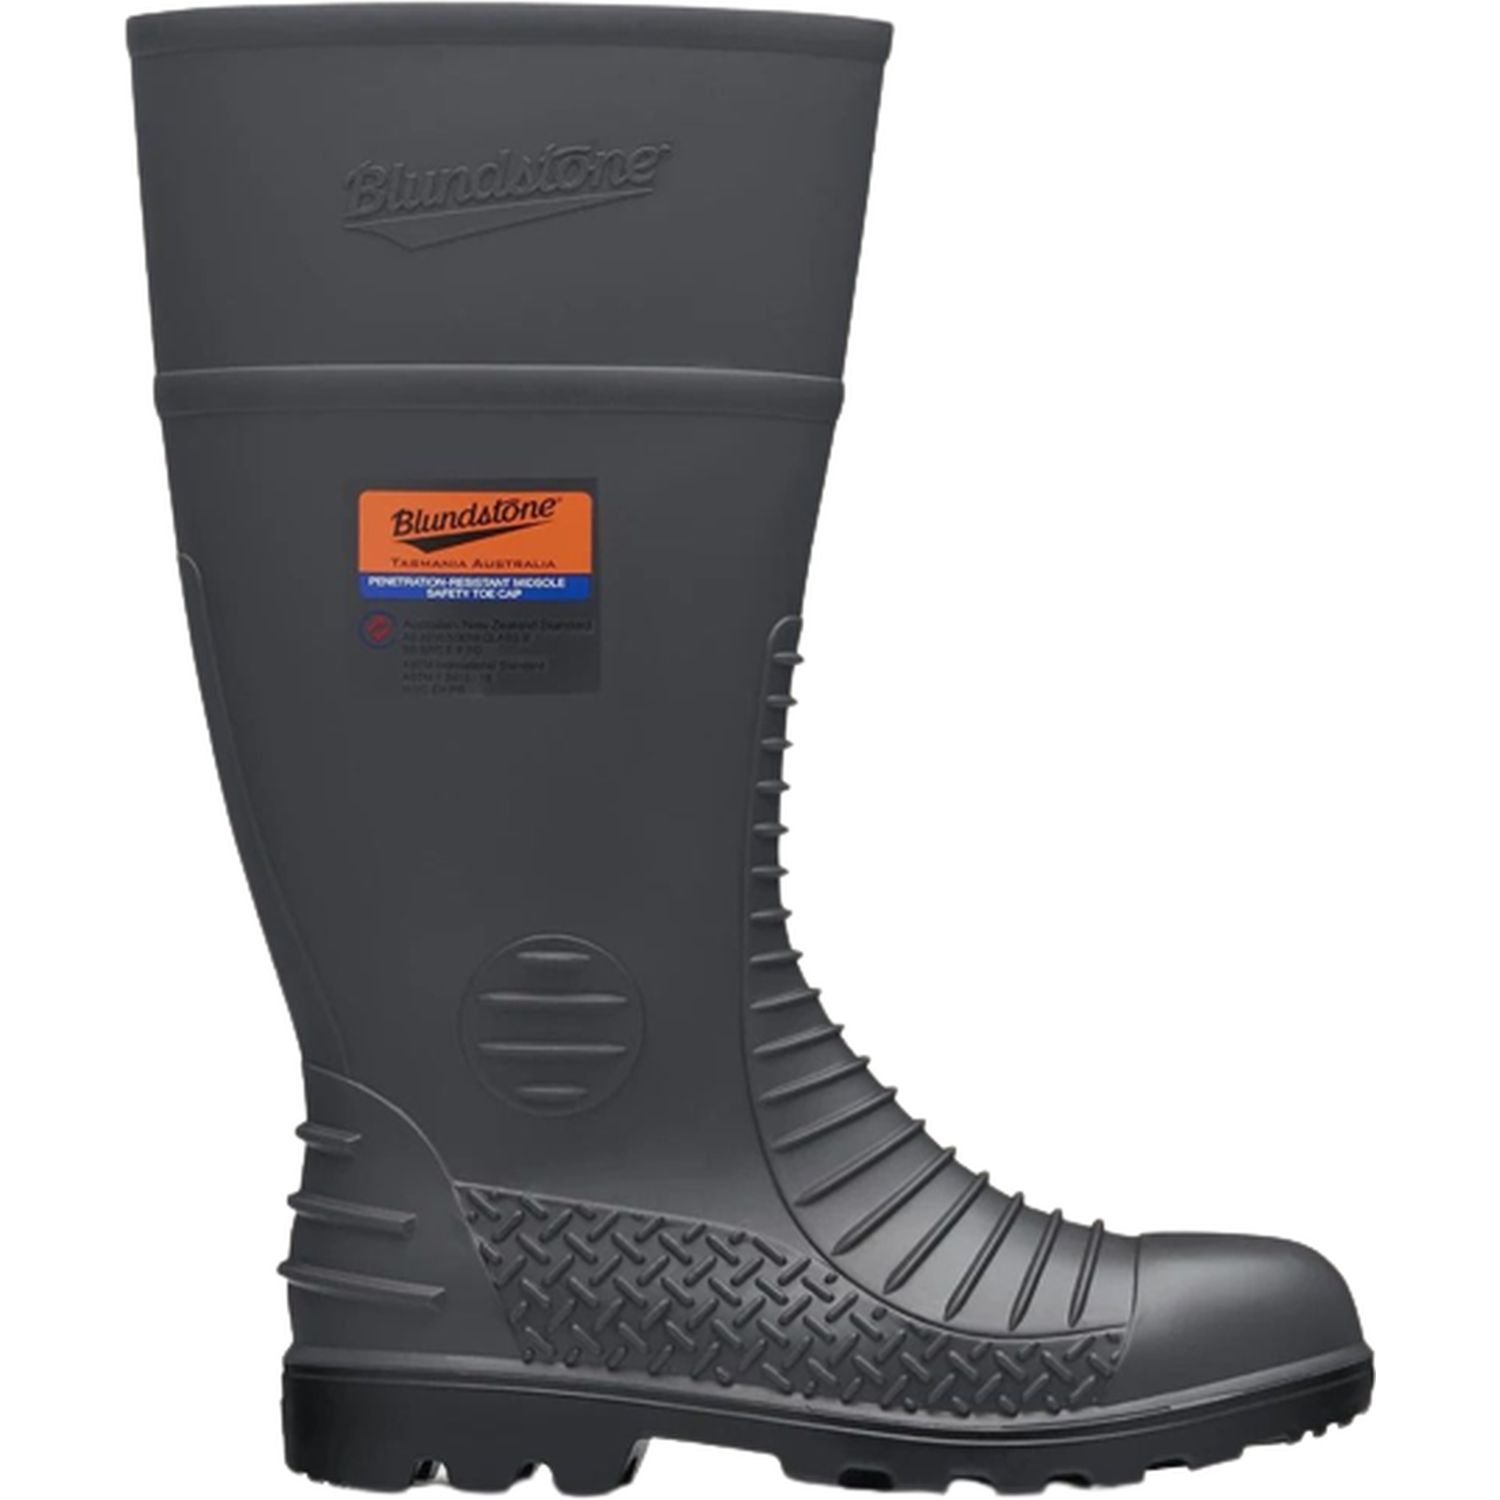 Blundstone Anti-Penetration Comfort Arch Safety Gumboot Grey